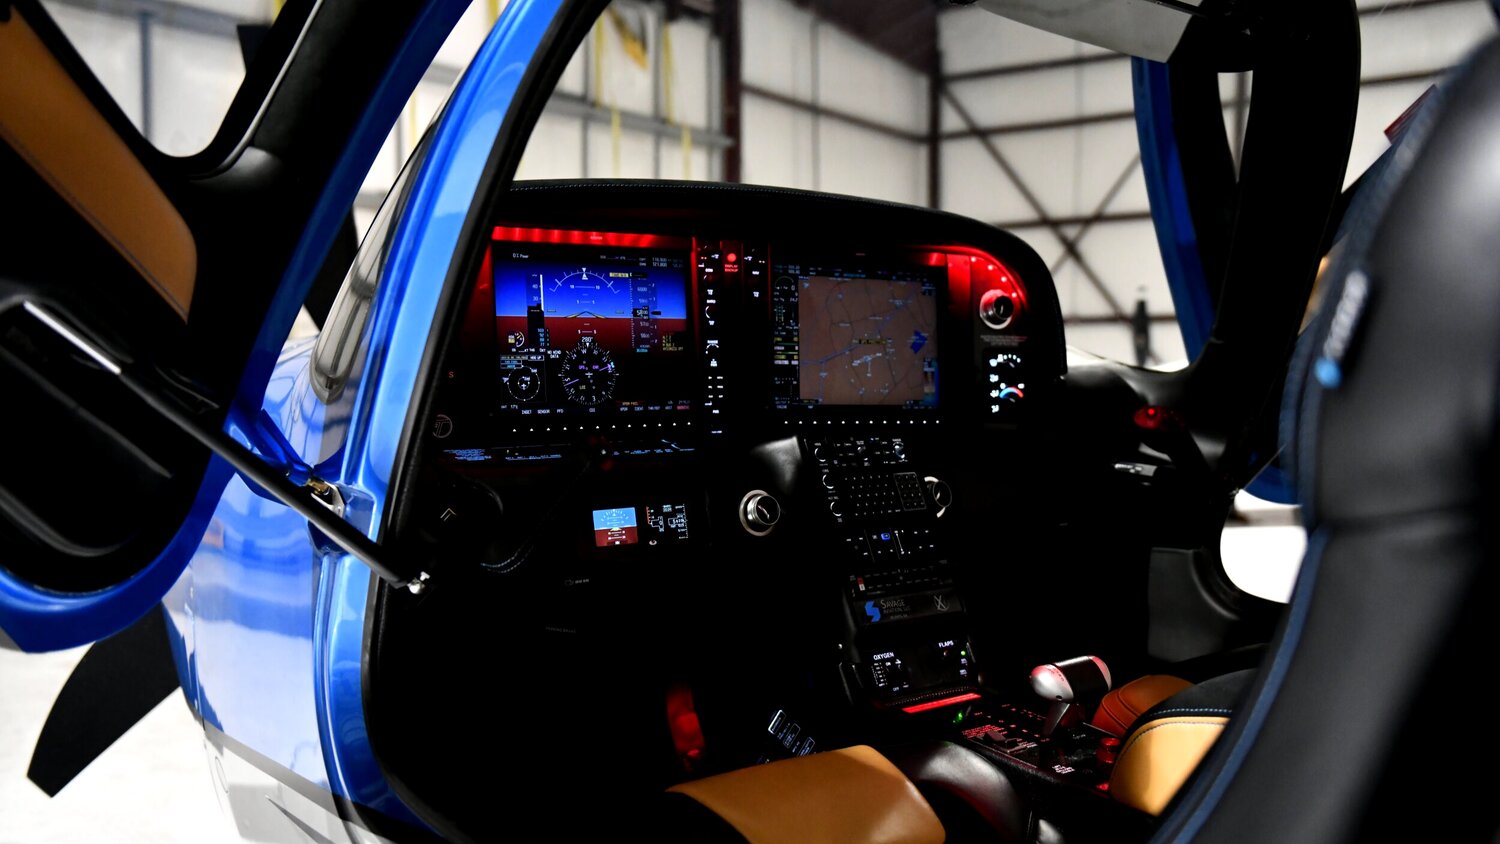 Garmin Perspective Avionics (G1000 Based) with a Flight Management System; leather seats; and a stunning interior design make this an airplane you’ll be proud of stepping in and out of during your trips. | N804HS